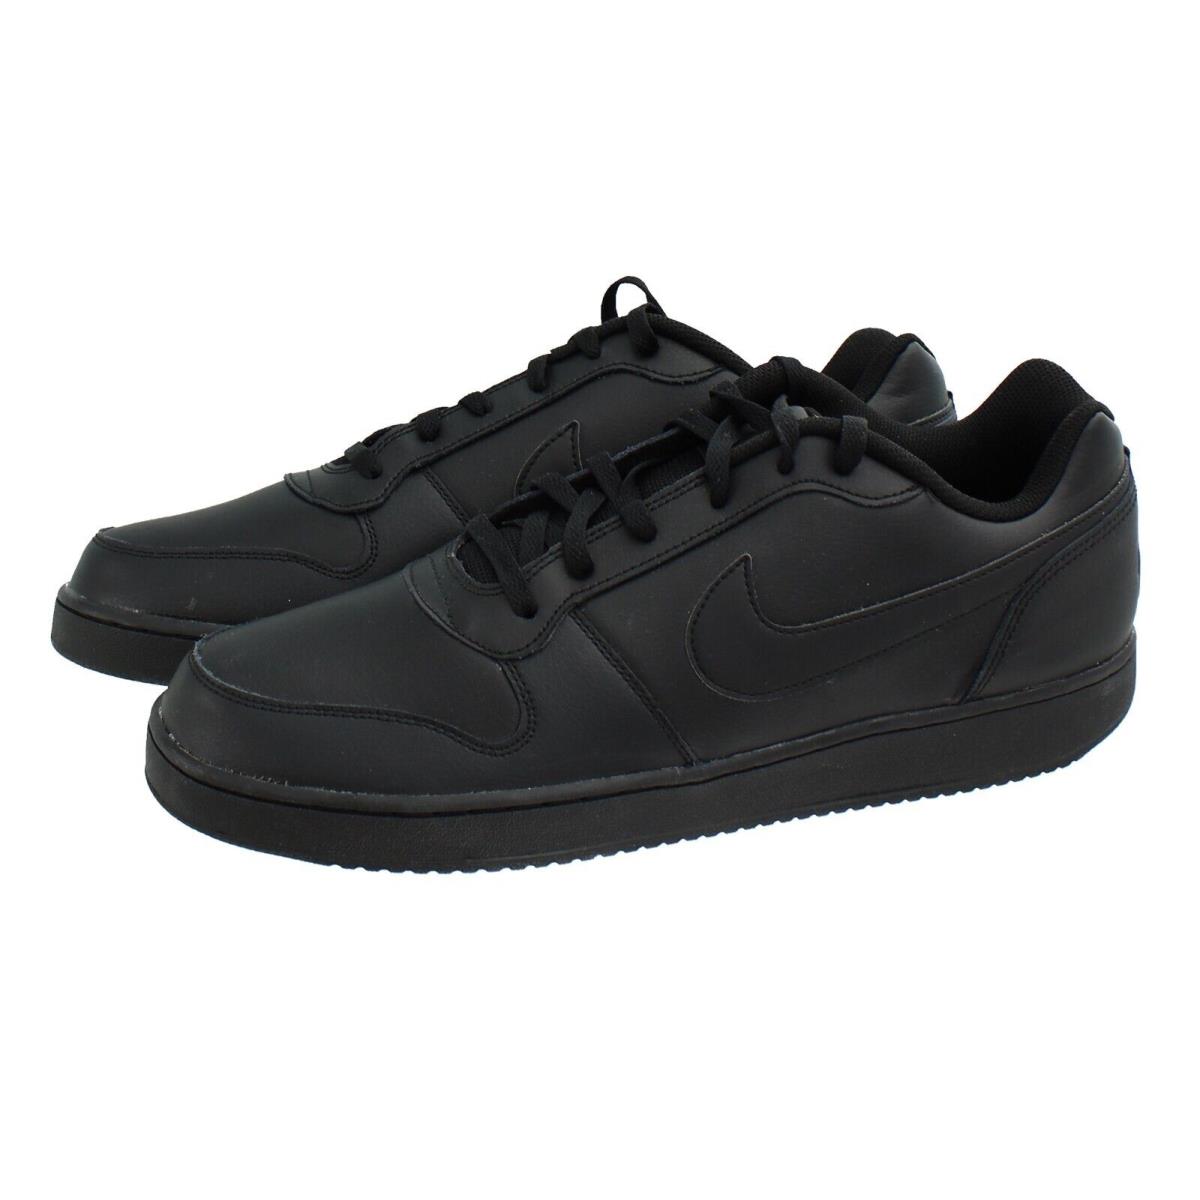 Nike Men`s Ebernon Low Sneakers AQ1775 Stitched Leather Retro-style Court Shoes Black - 003